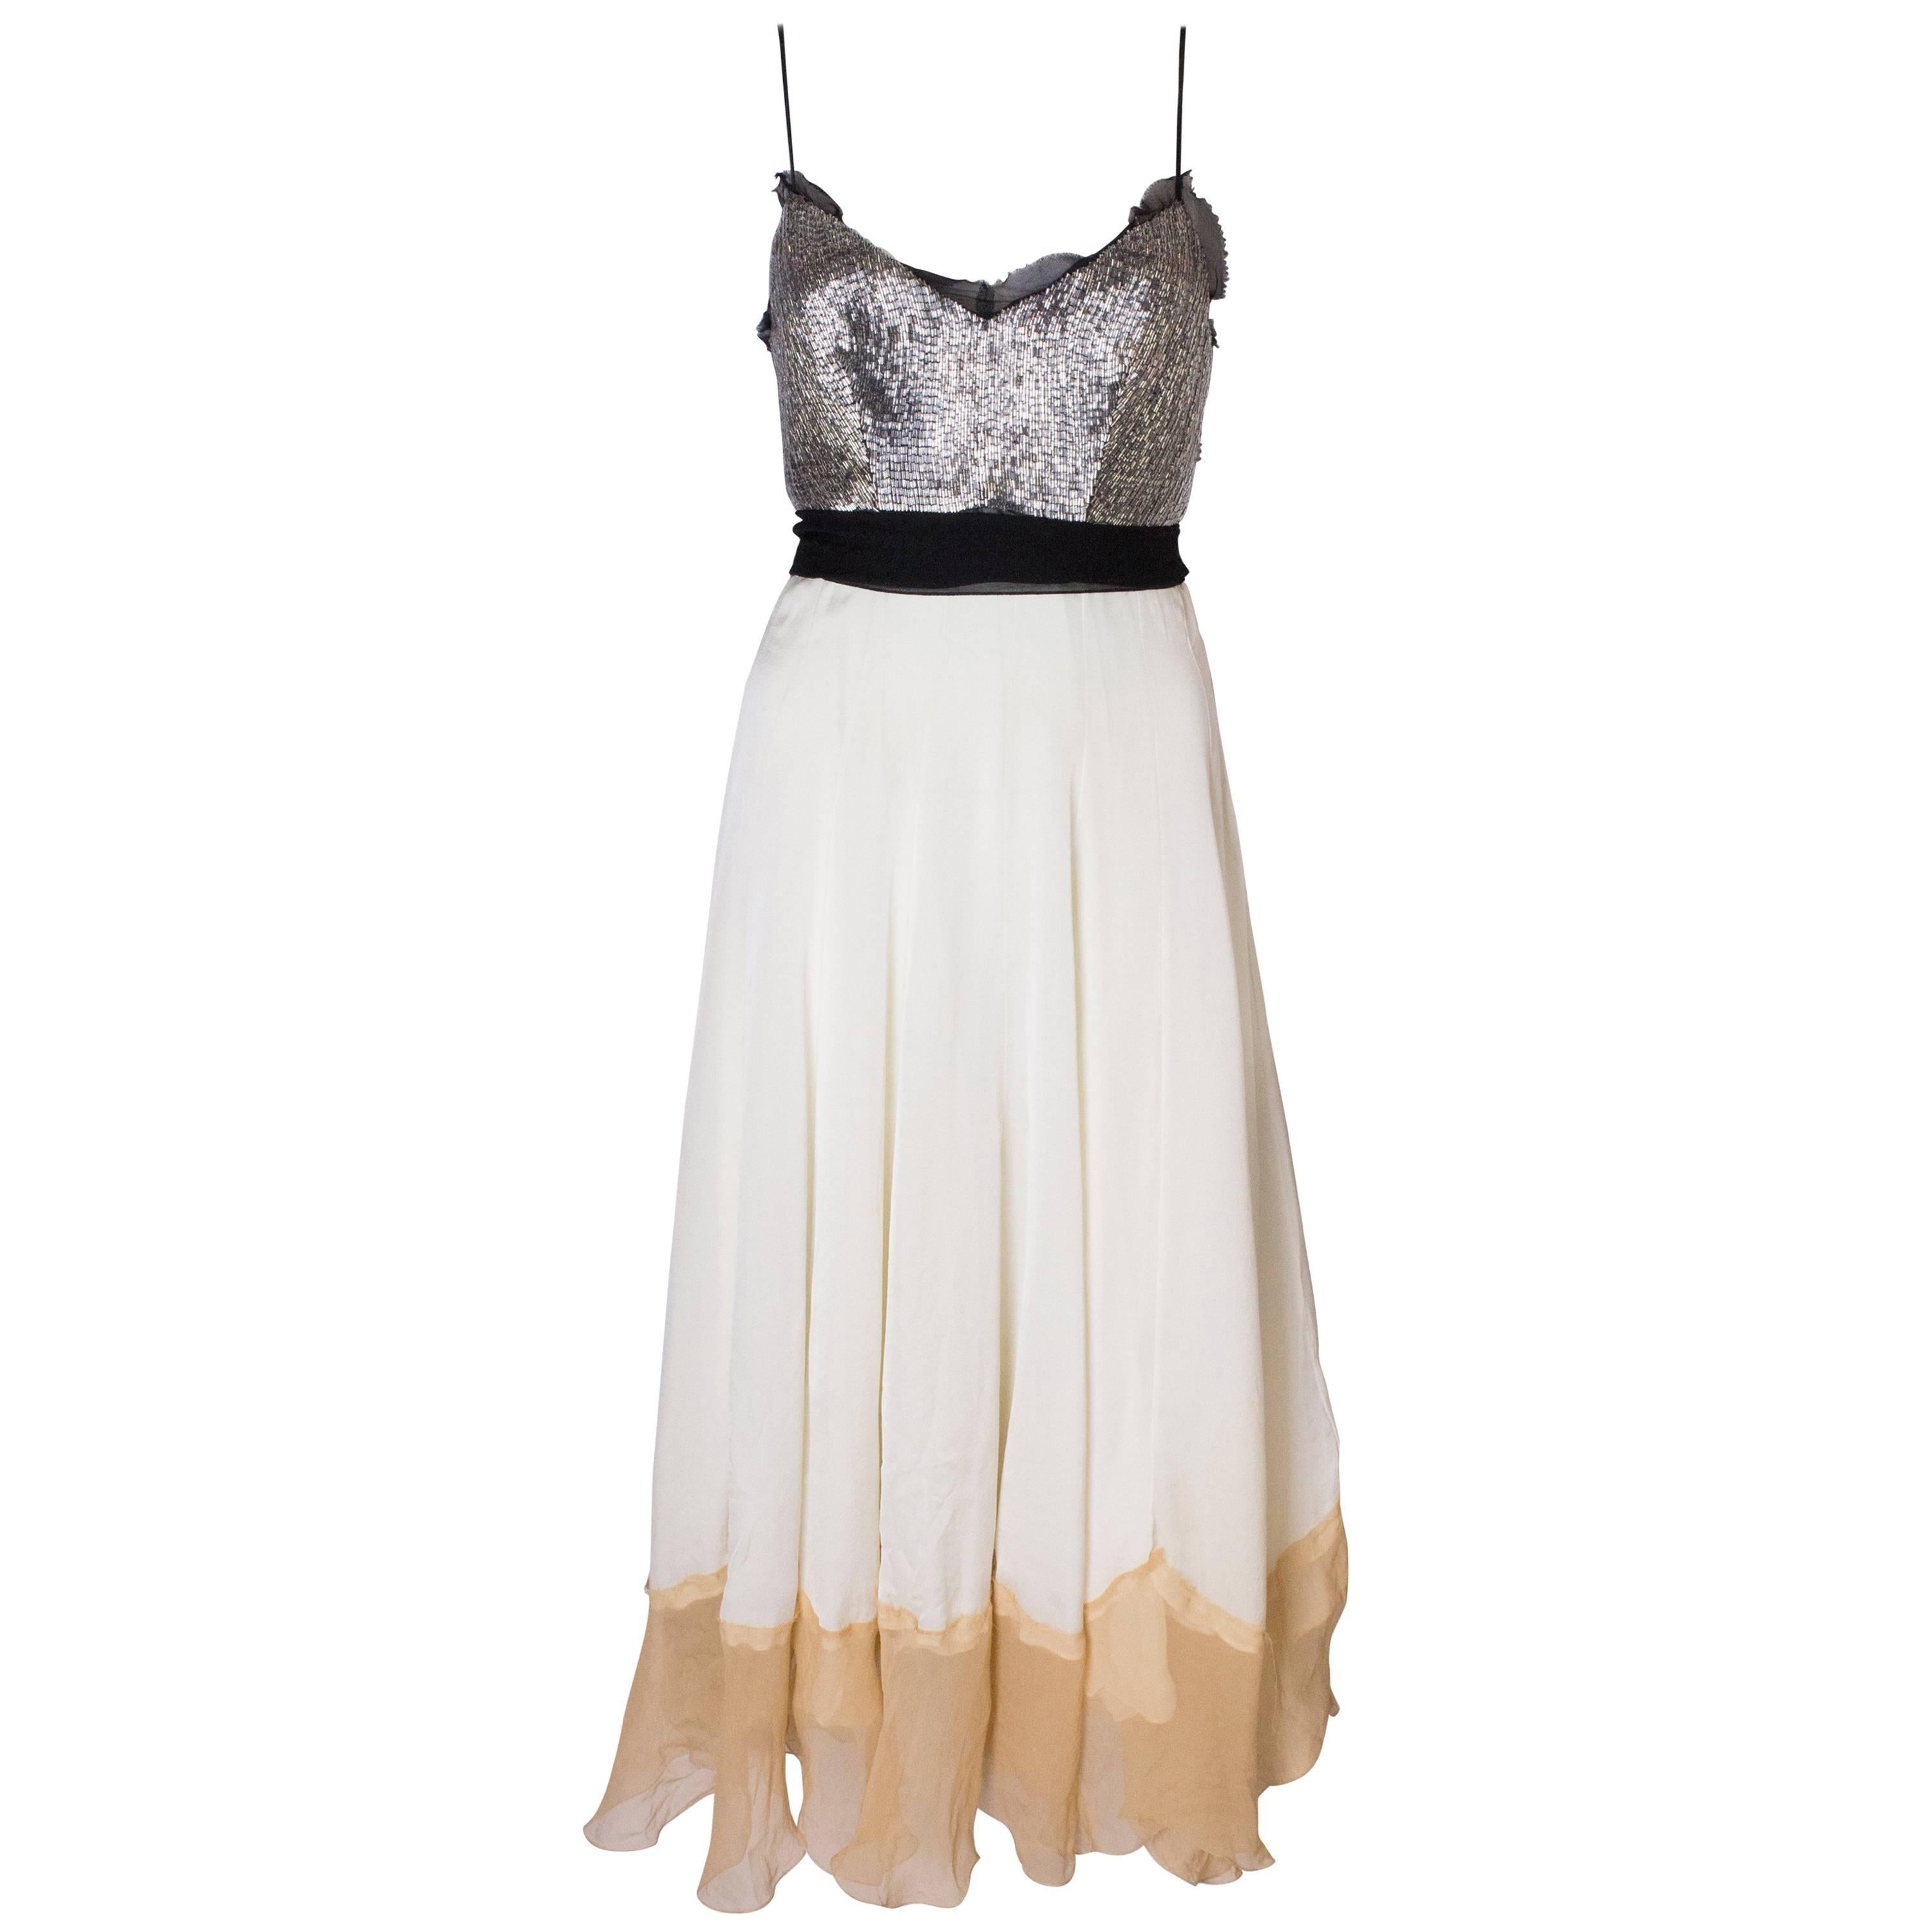 A Vintage 1990s silk chiffon and beaded party dress by Chloe 